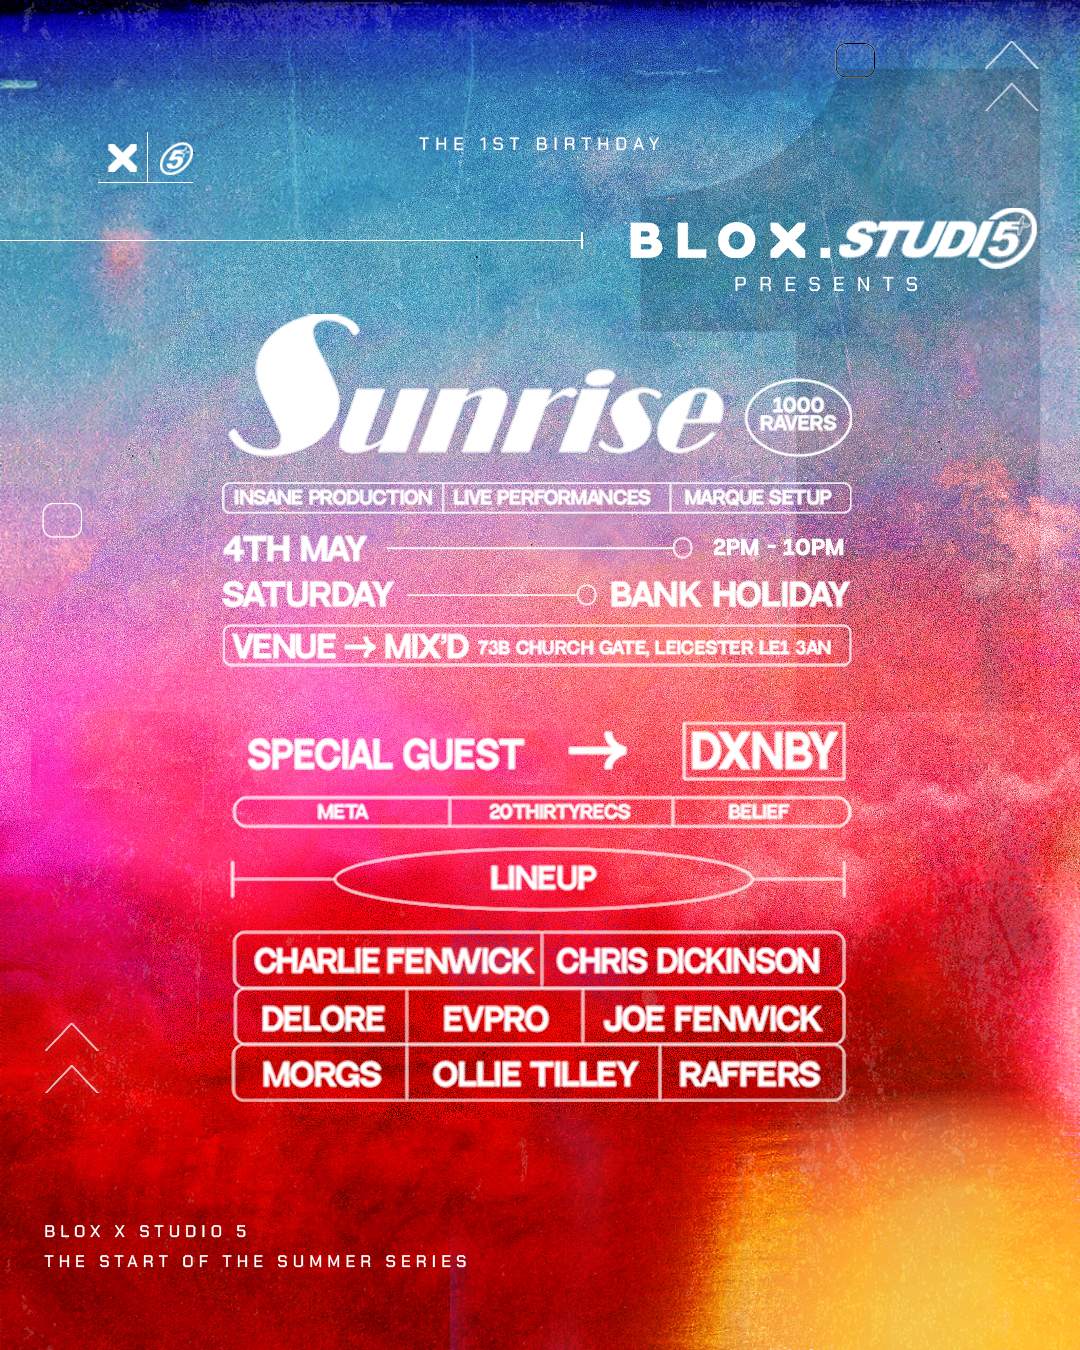 BLOX x STUDIO 5 - 1st Birthday DAY RAVE with DXNBY - フライヤー表